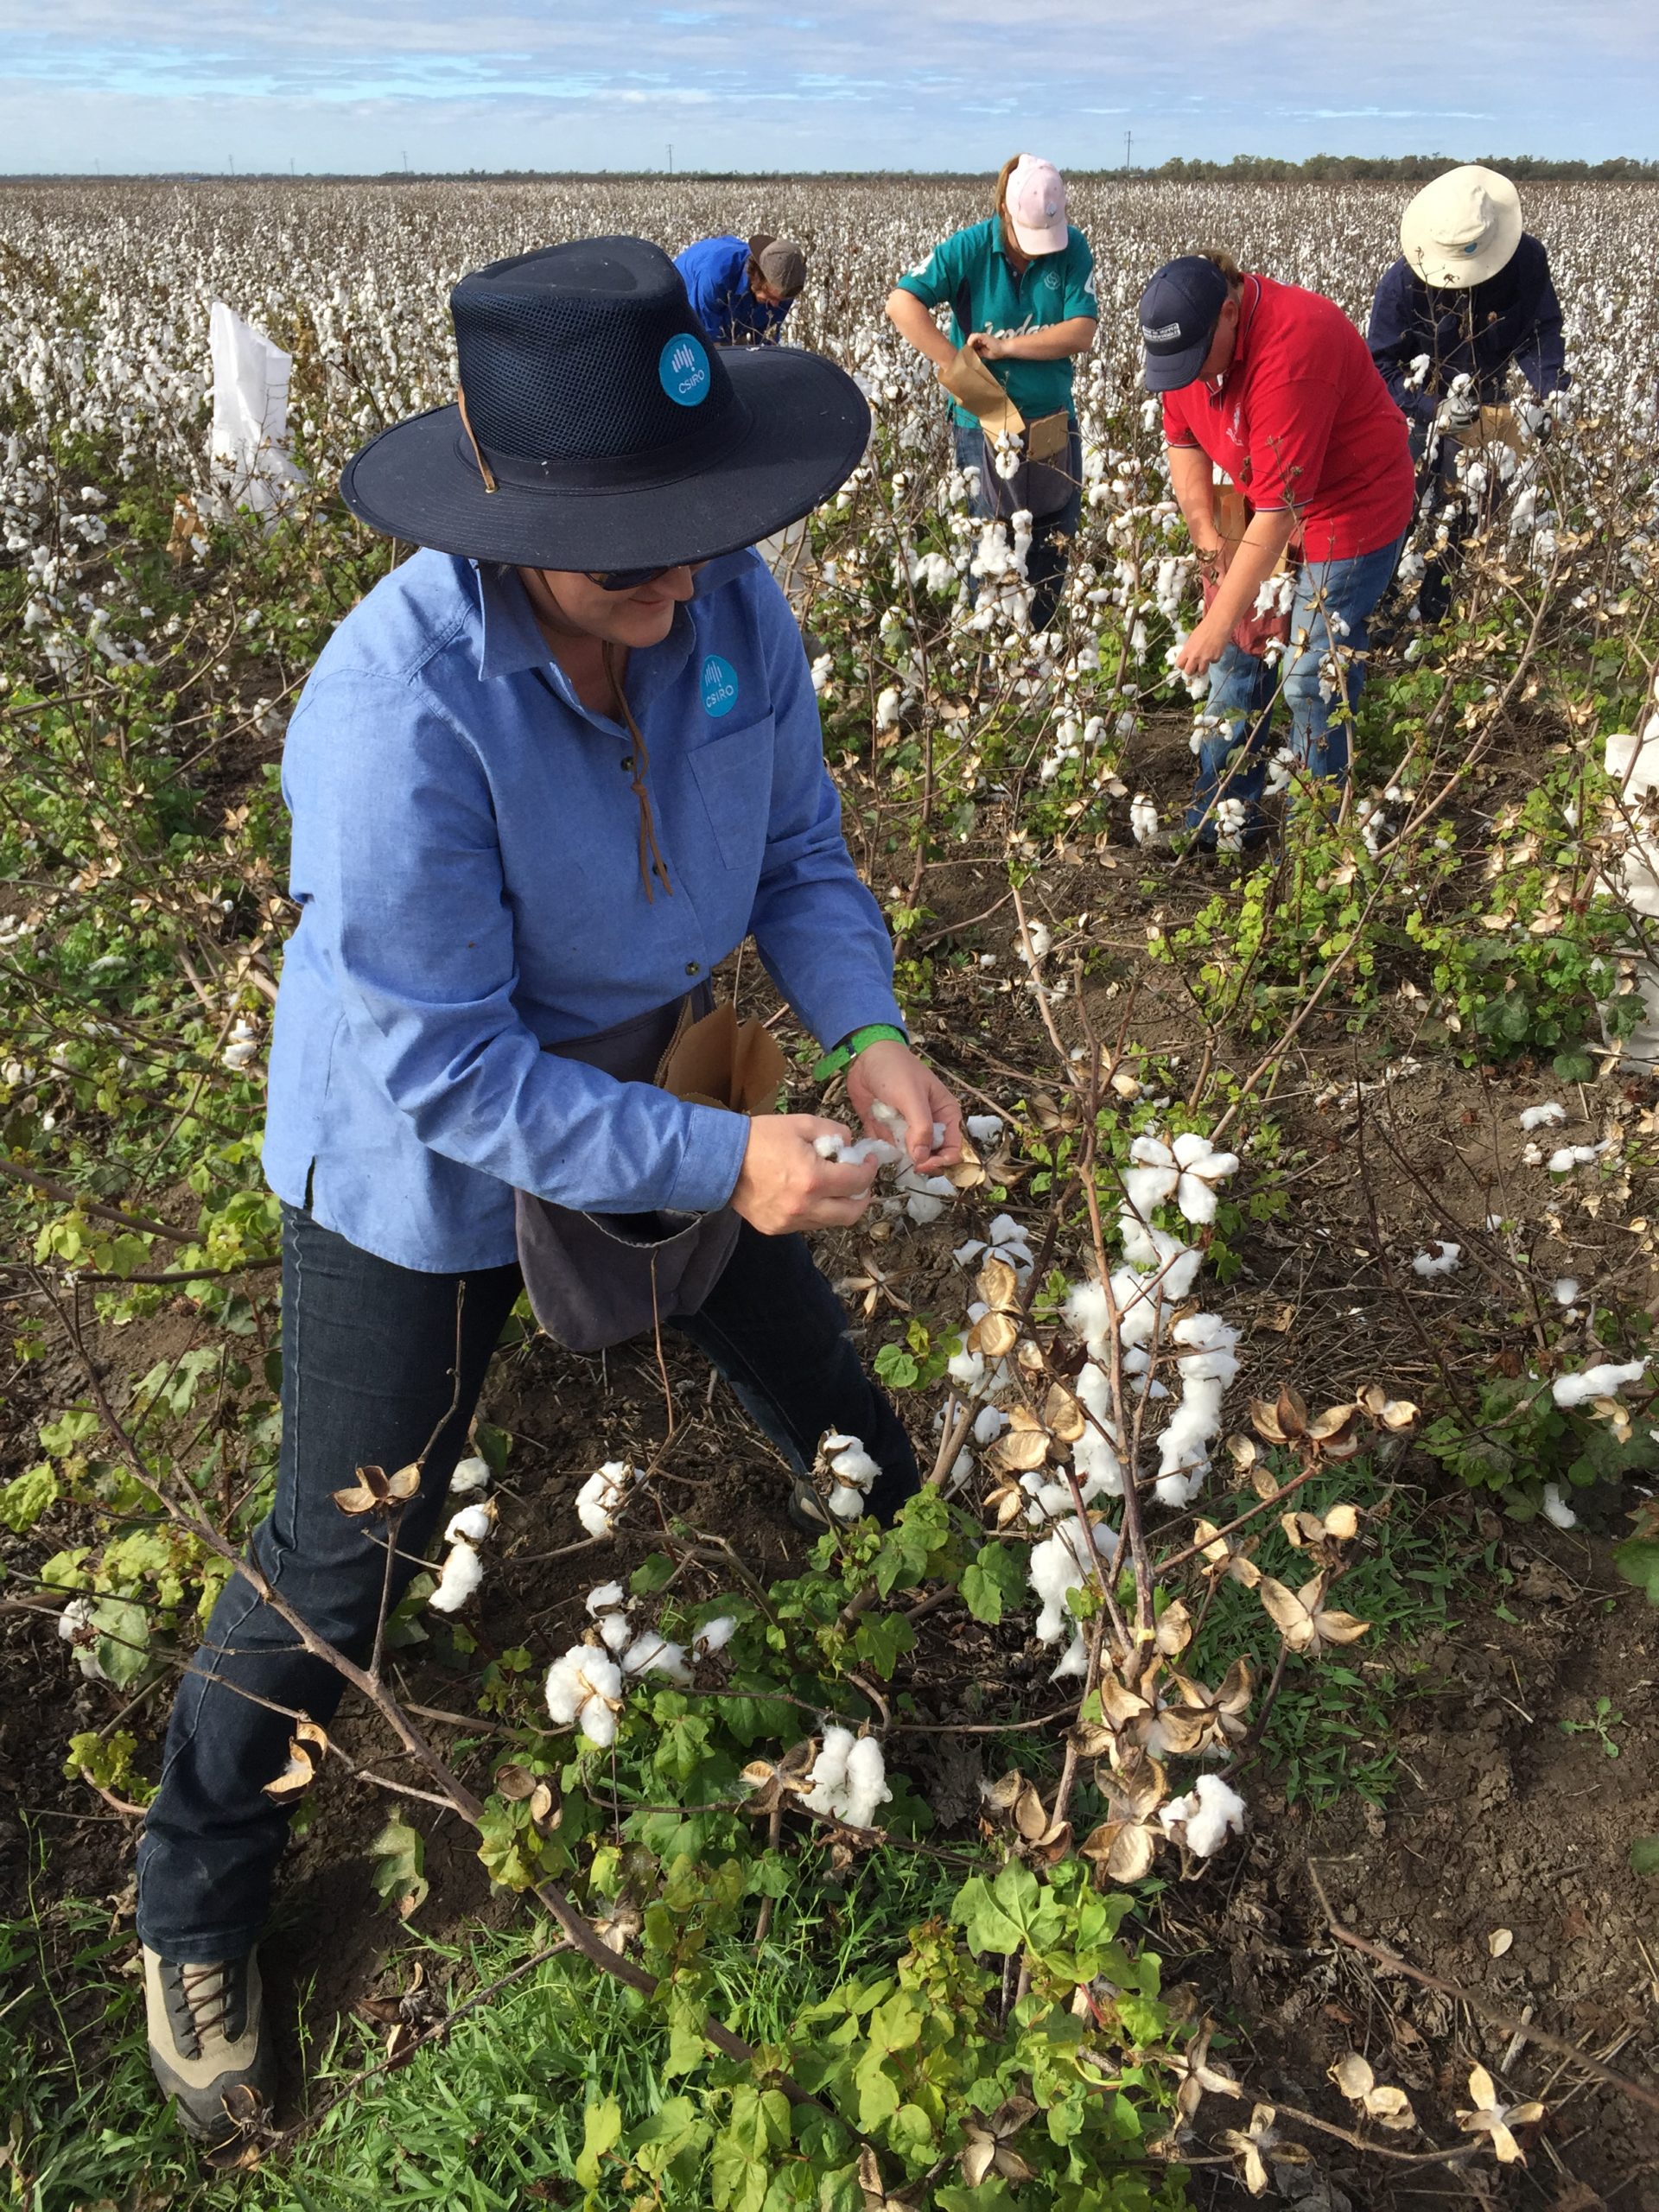 Heather Campbell working with team on cotton field.